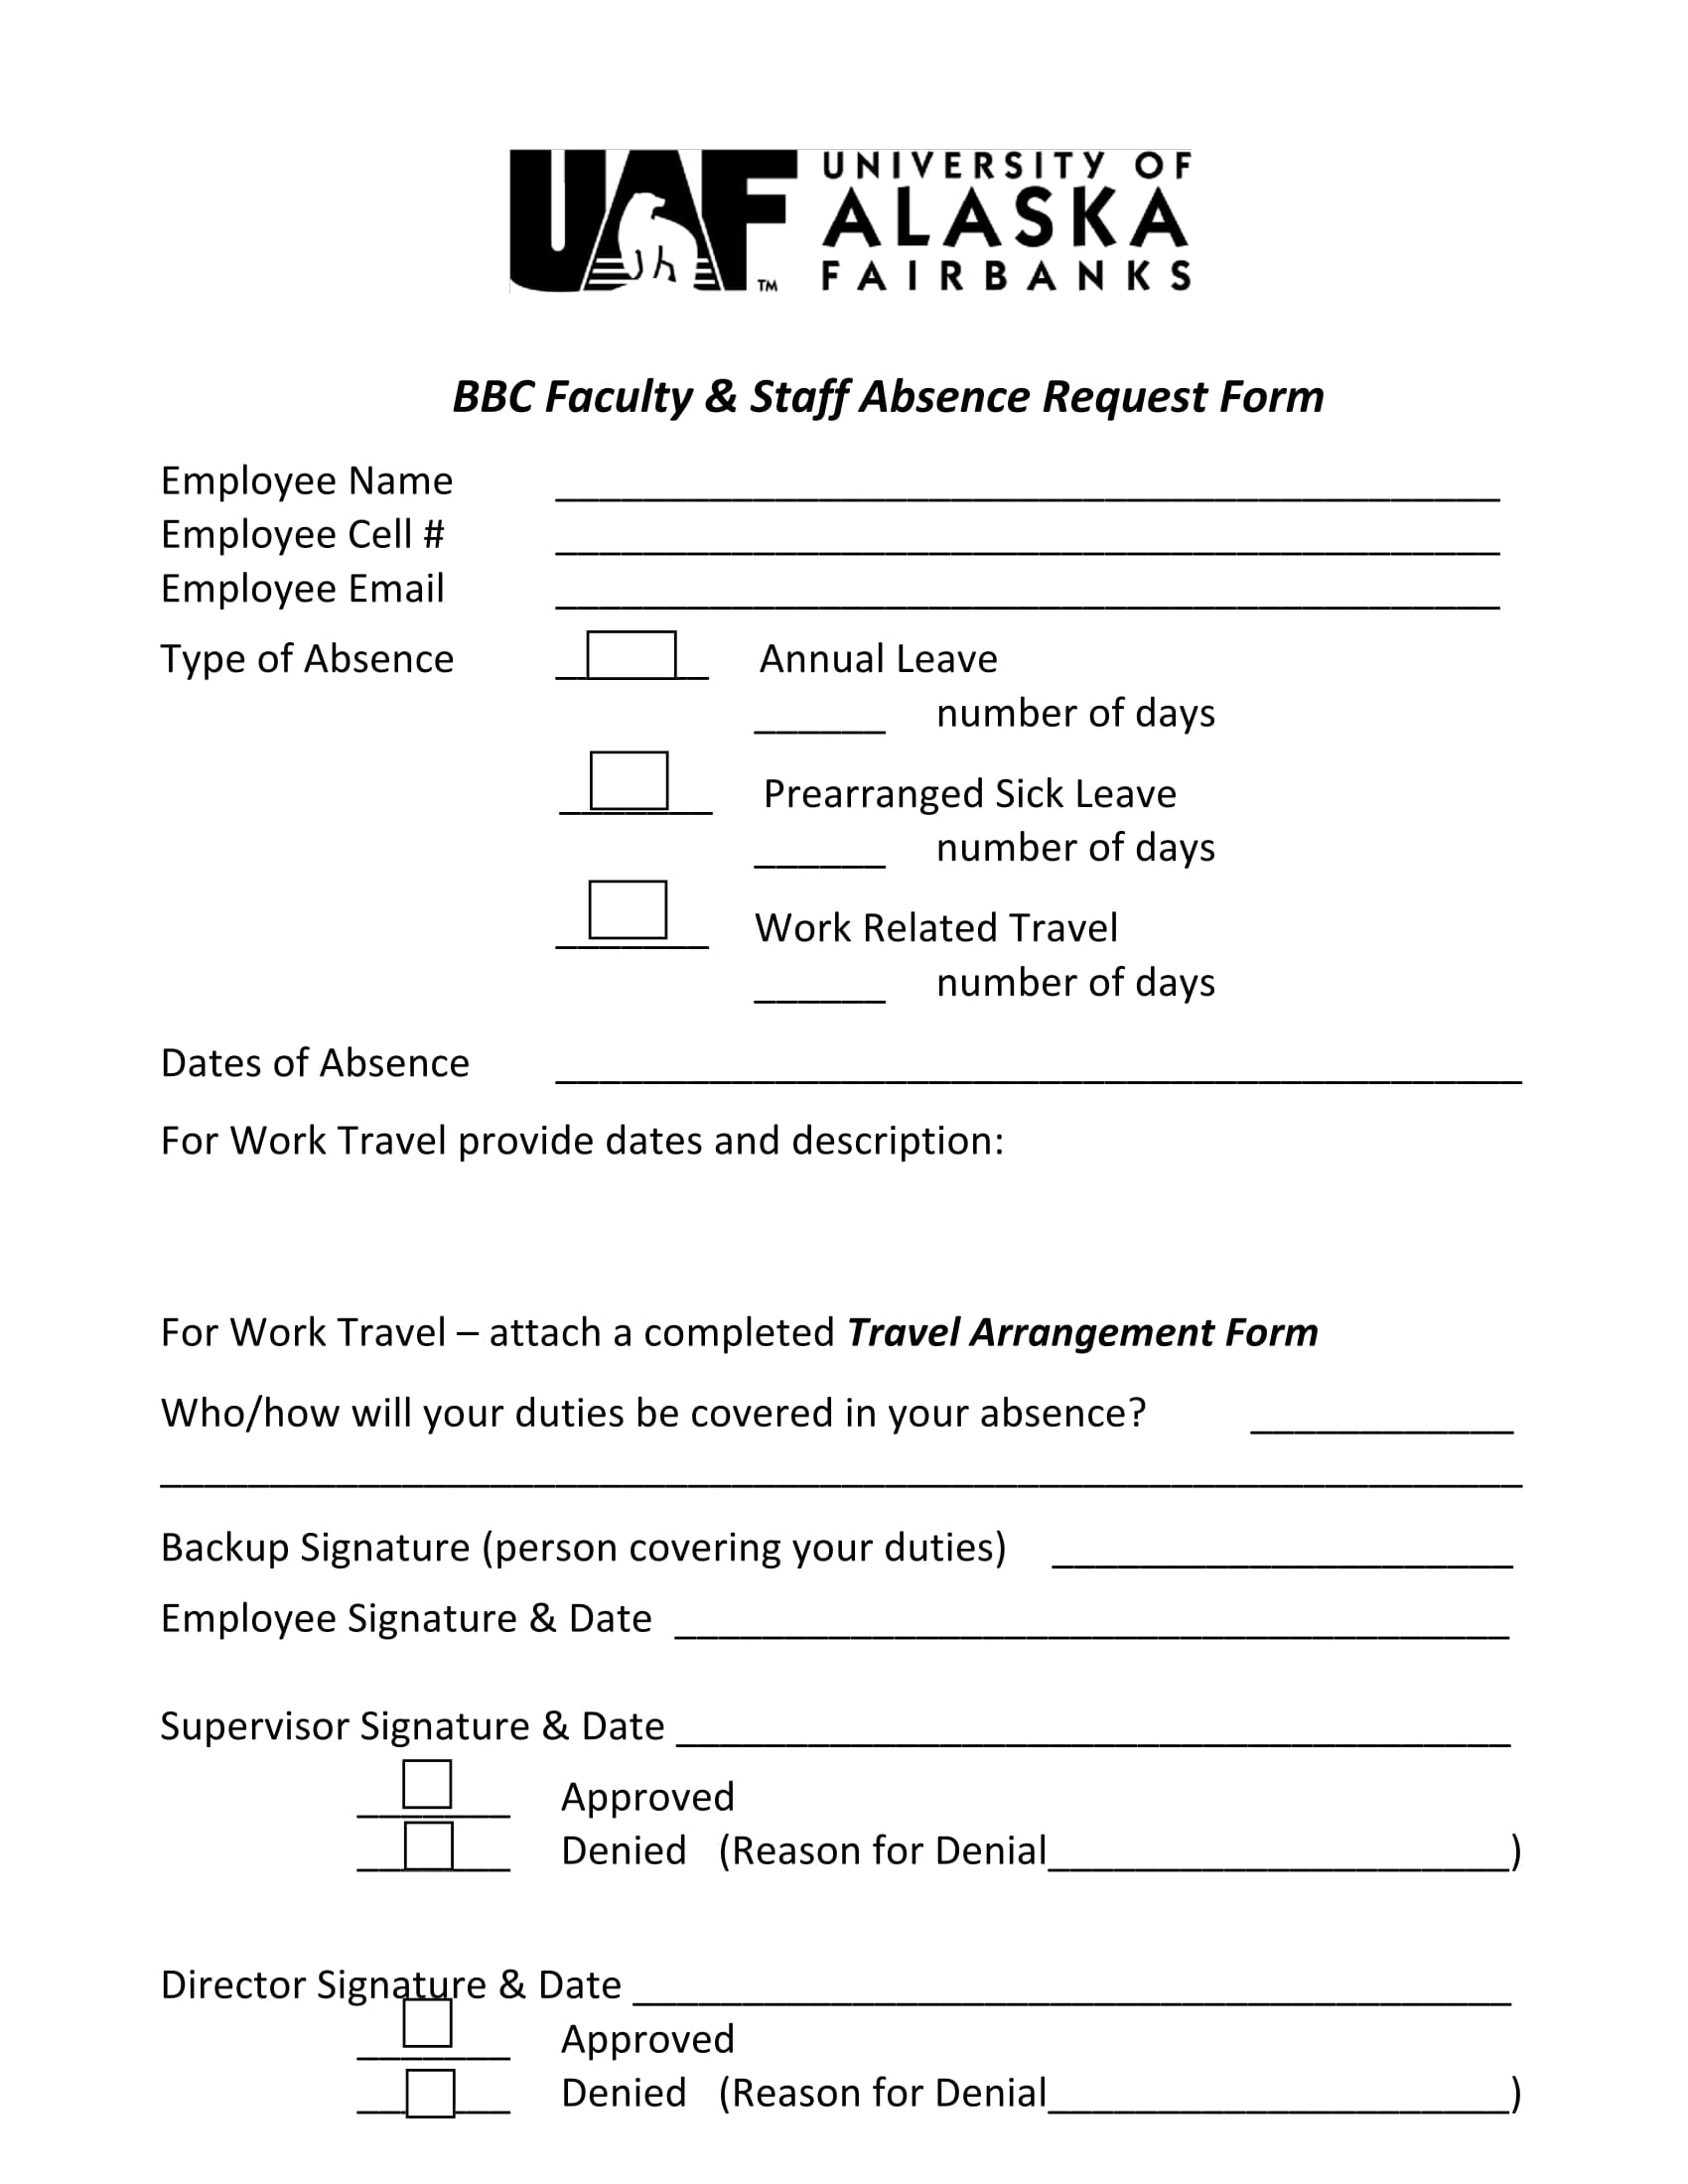 faculty staff absence request form 1